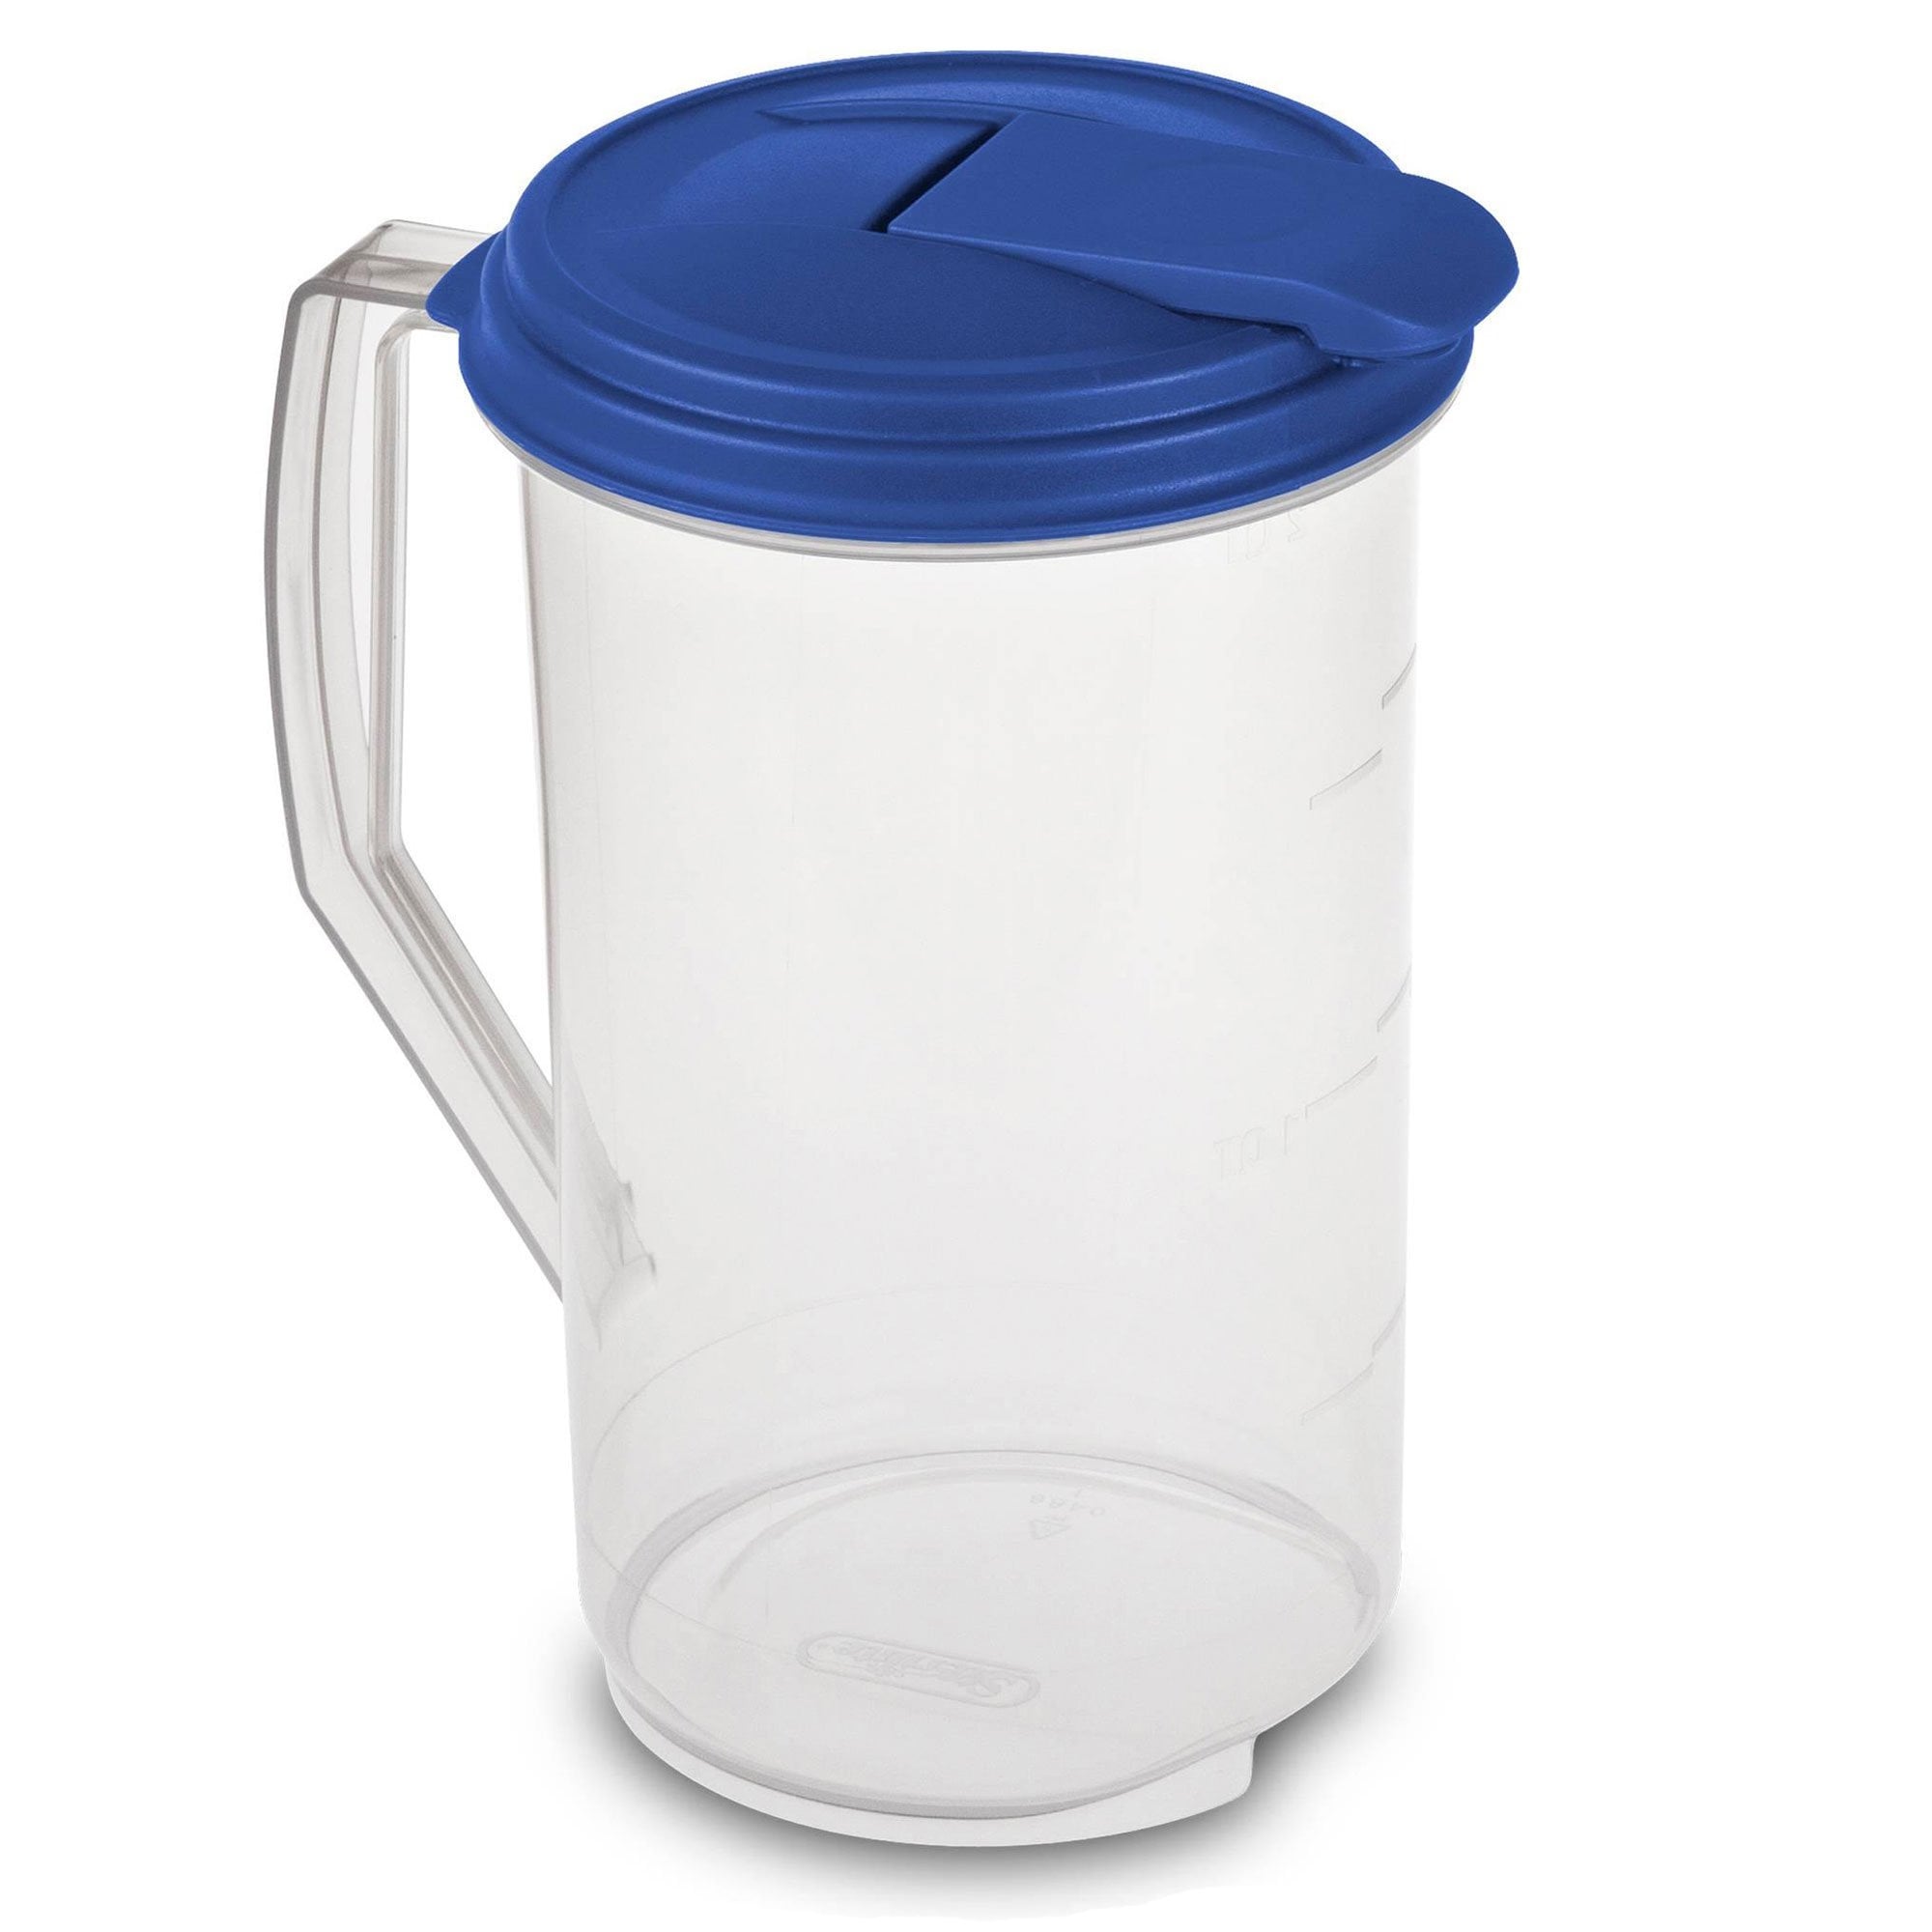 https://ak1.ostkcdn.com/images/products/is/images/direct/50754495f3927a60354e5878556a635fef647bce/Sterilite-2-Qt-Clear-Plastic-Drink-Pitcher-with-Leak-Proof-Lid%2C-Blue-%2818-Pack%29.jpg